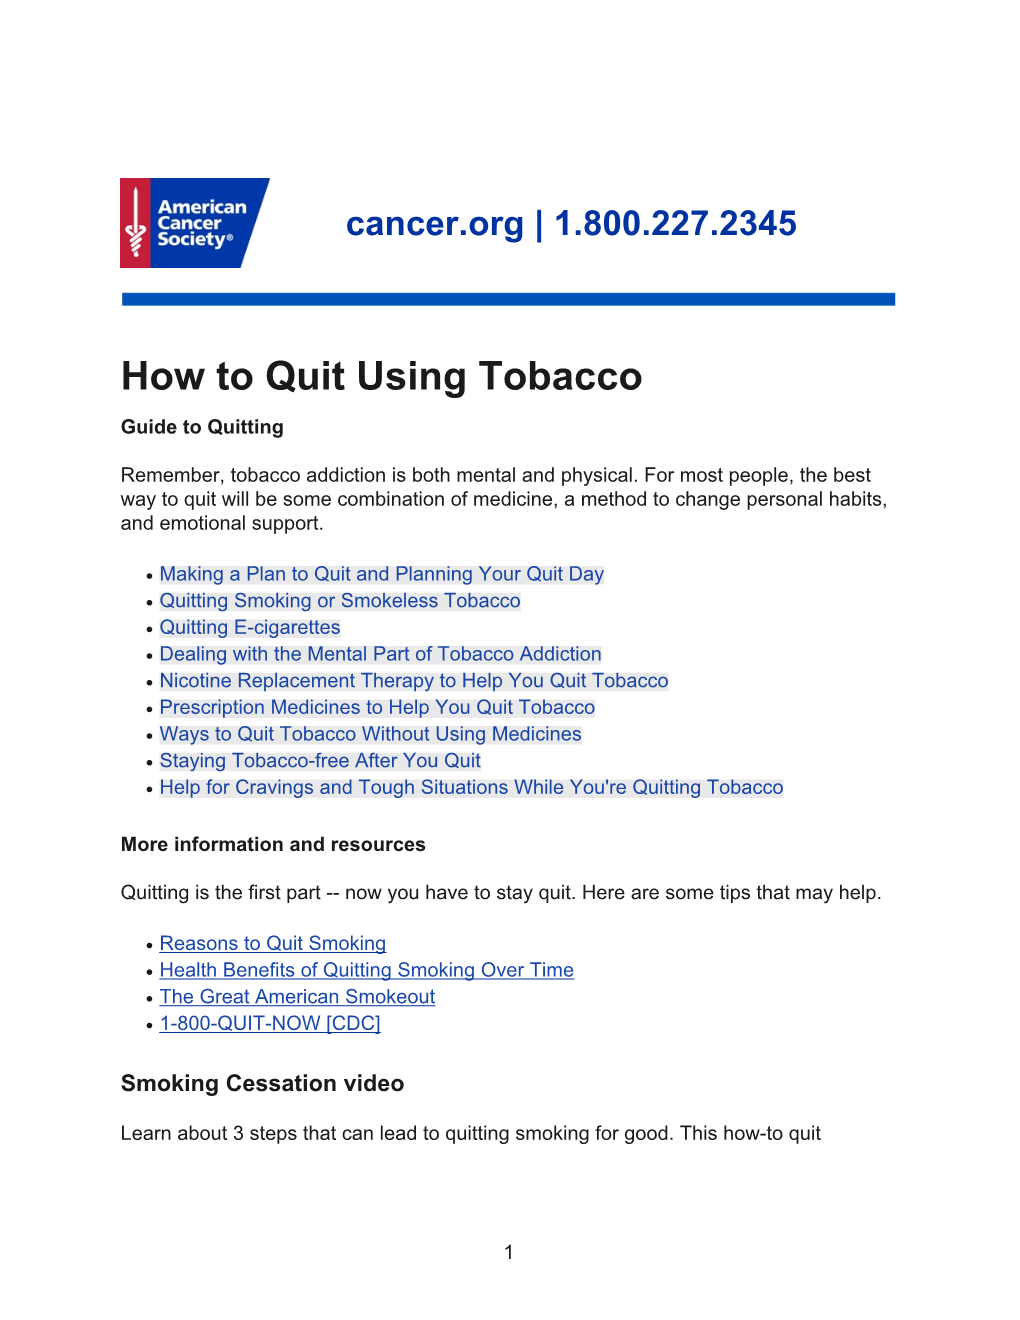 How to Quit Using Tobacco Guide to Quitting